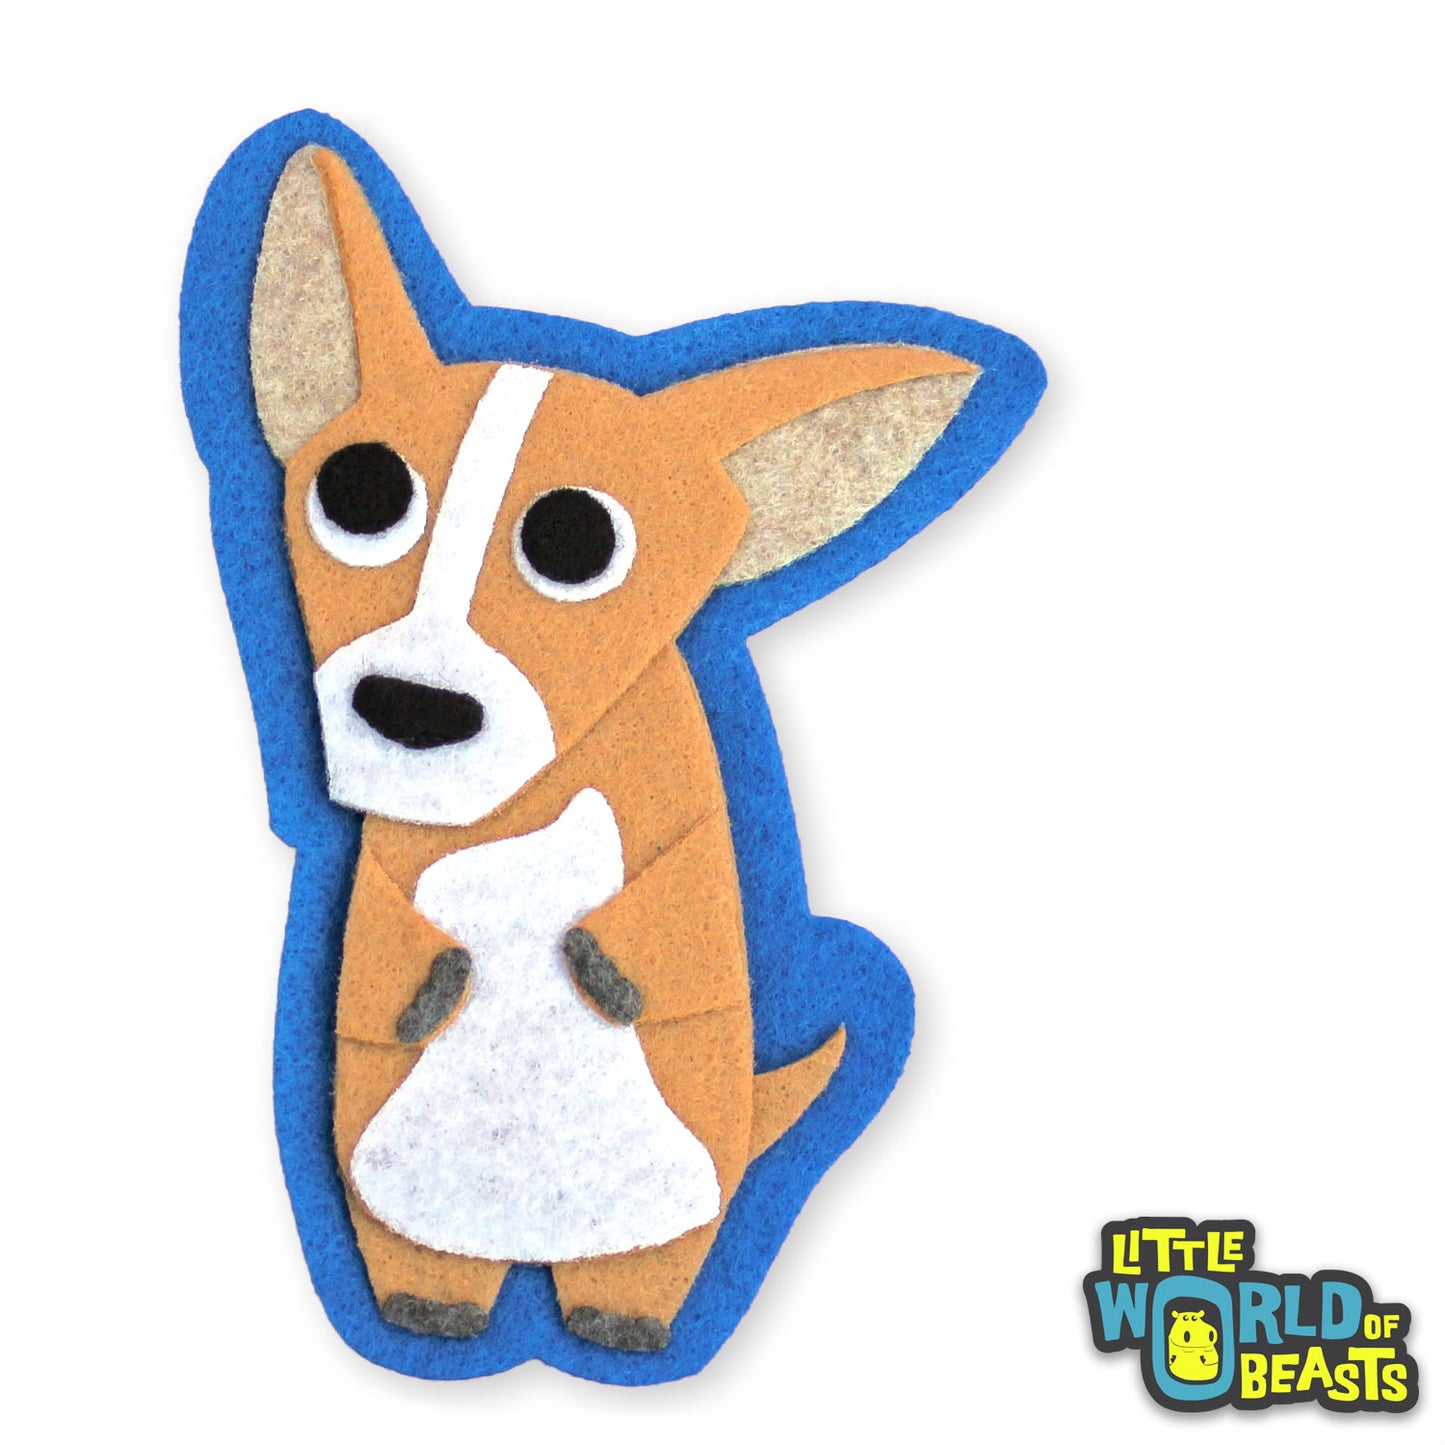 Habanero the Chihuahua Patch - Felt Animal Applique - Little World of Beasts